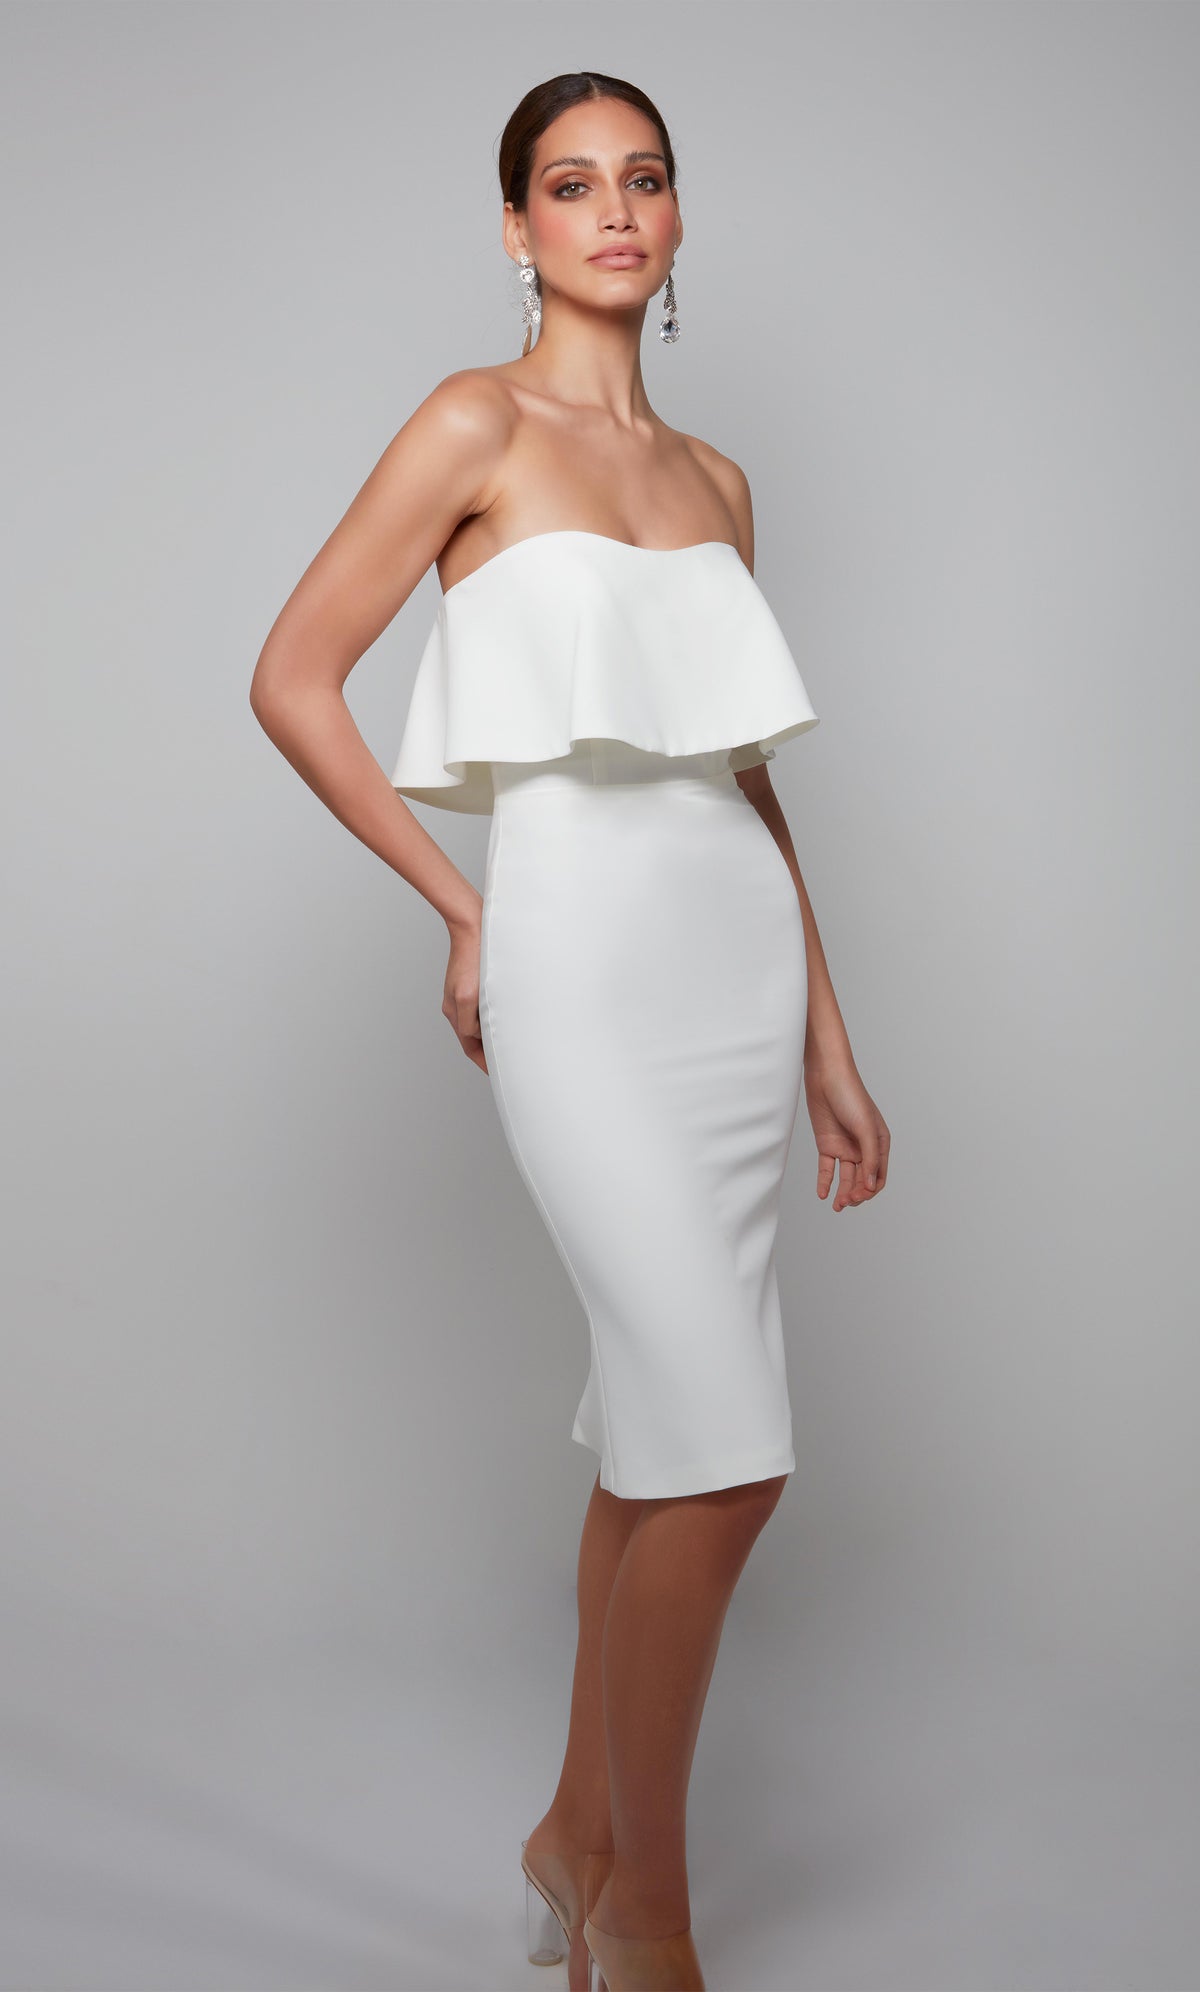 Ruffled strapless engagement party dress in ivory.